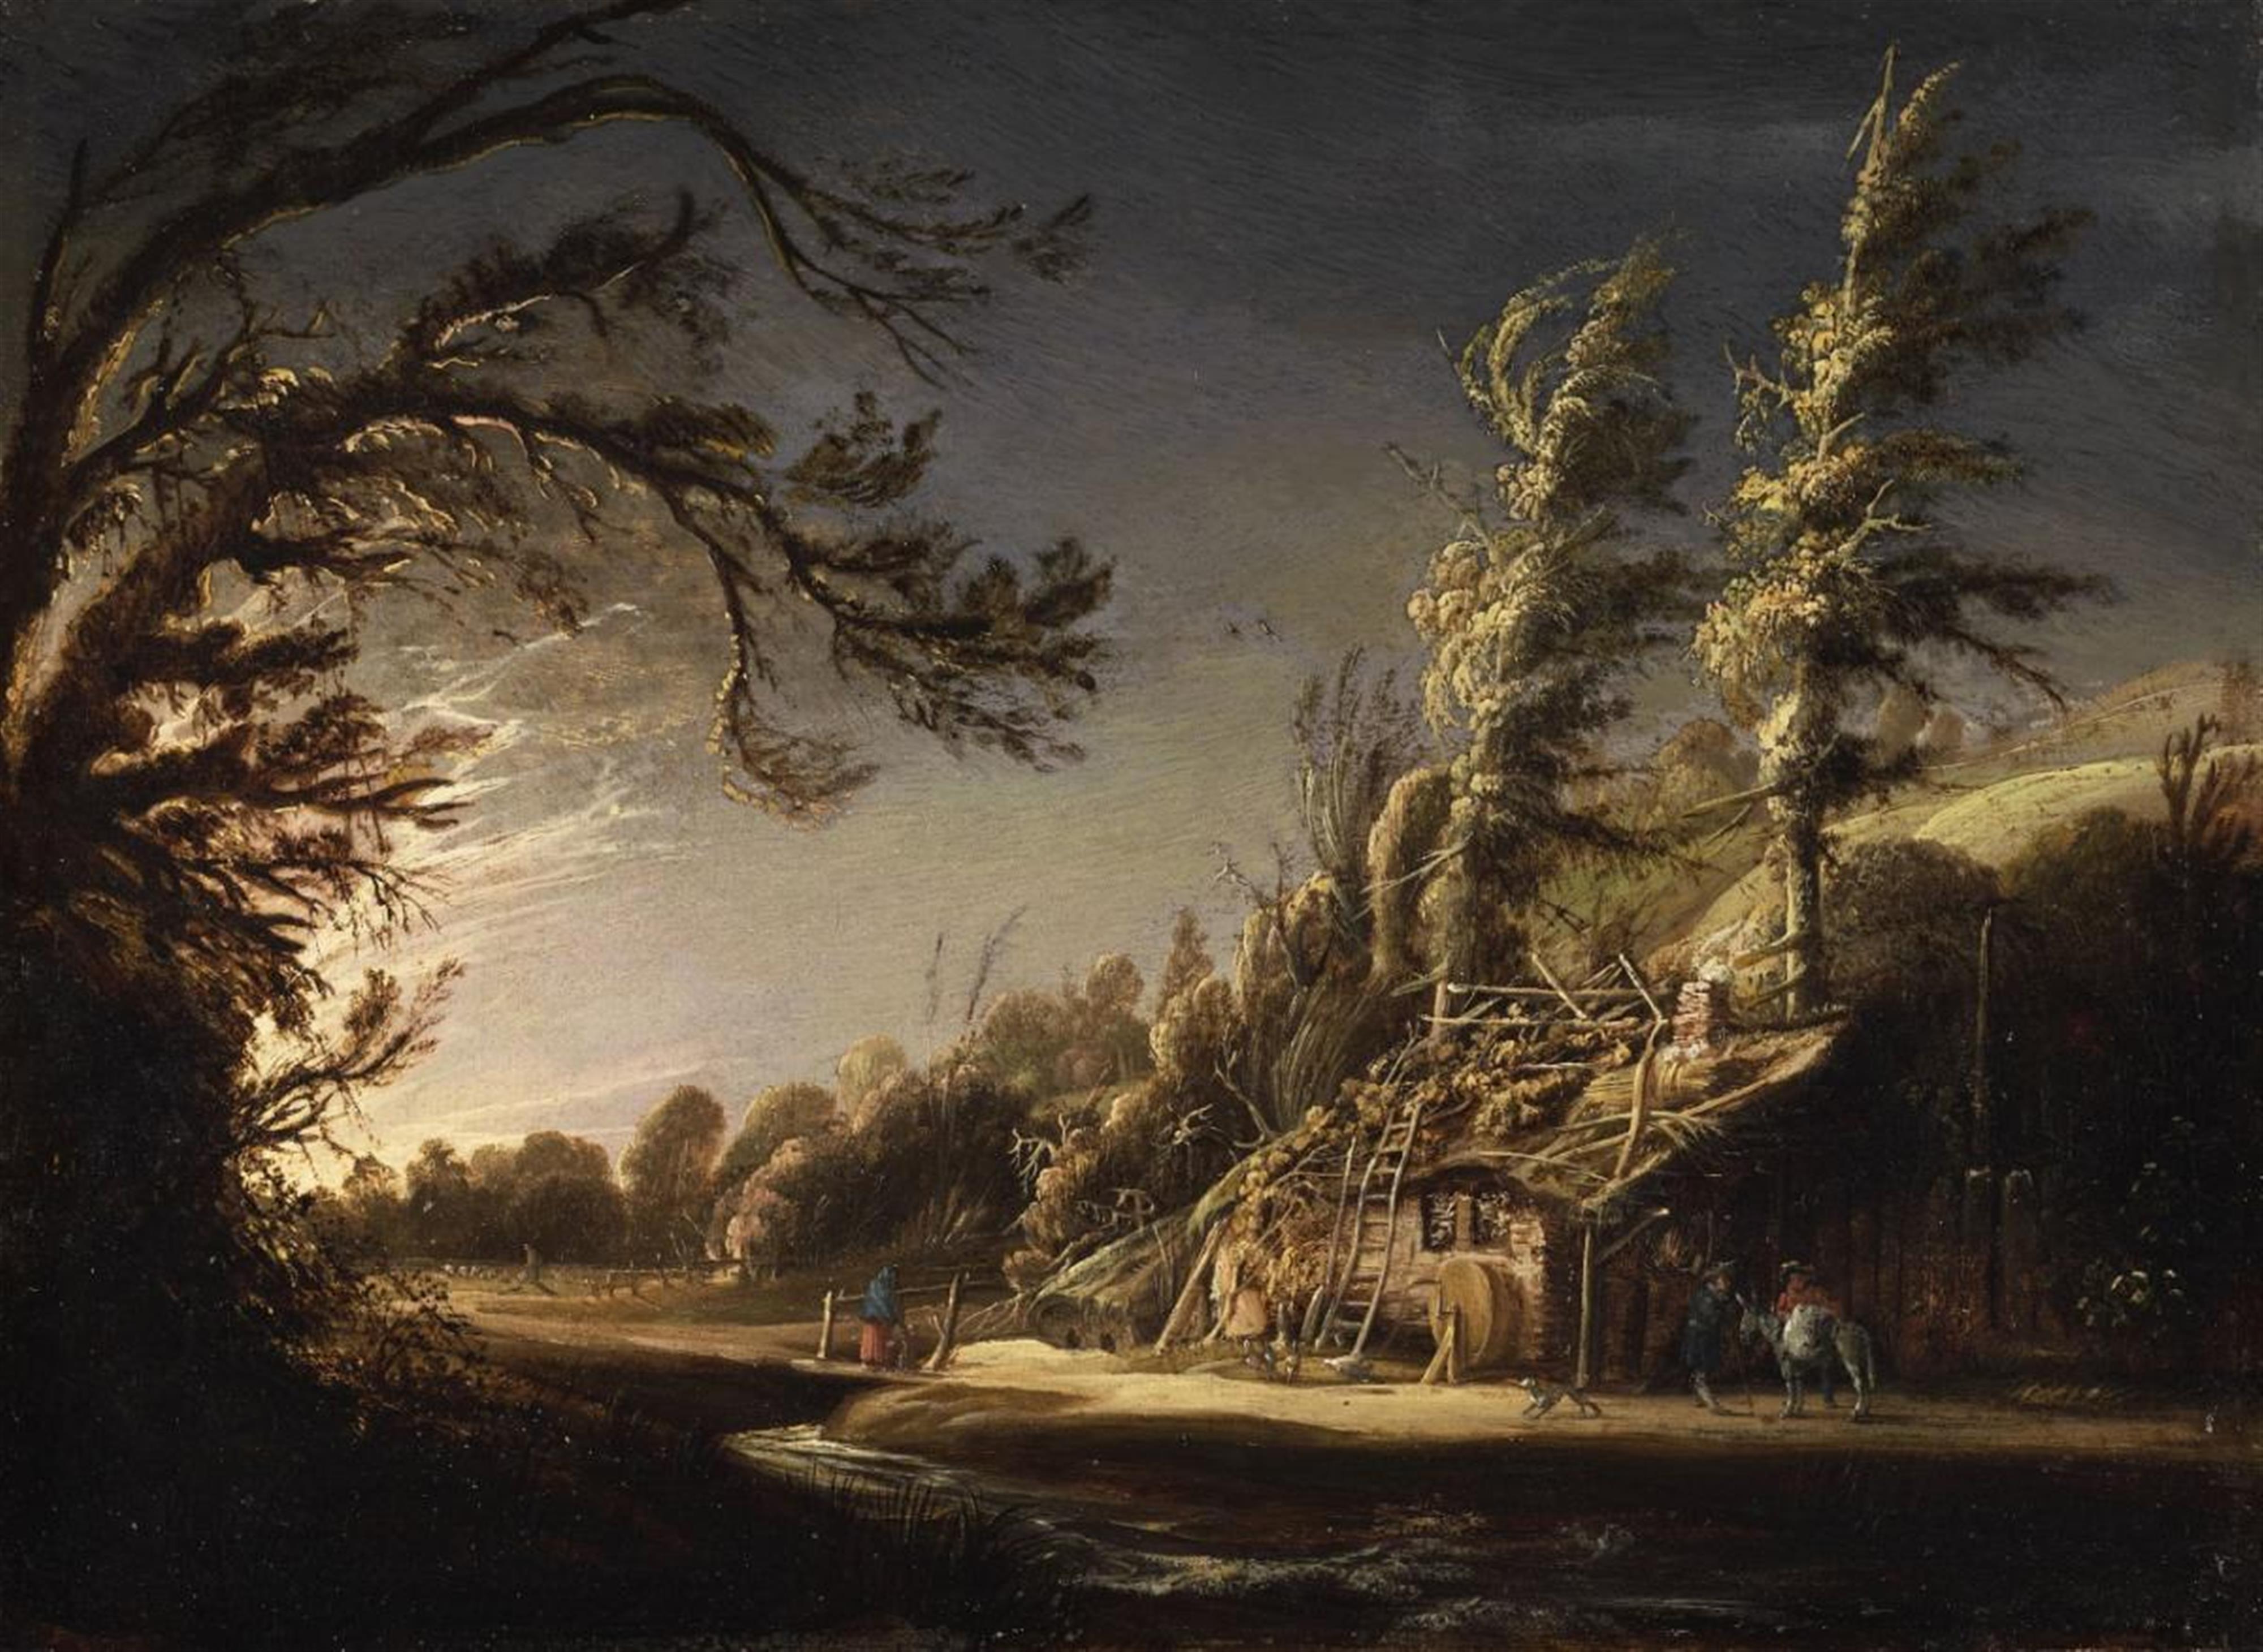 Jochem Govertsz. Camphuysen, attributed to - A WOODED LANDSCAPE WITH PEASANTS AND A DONKEY - image-1